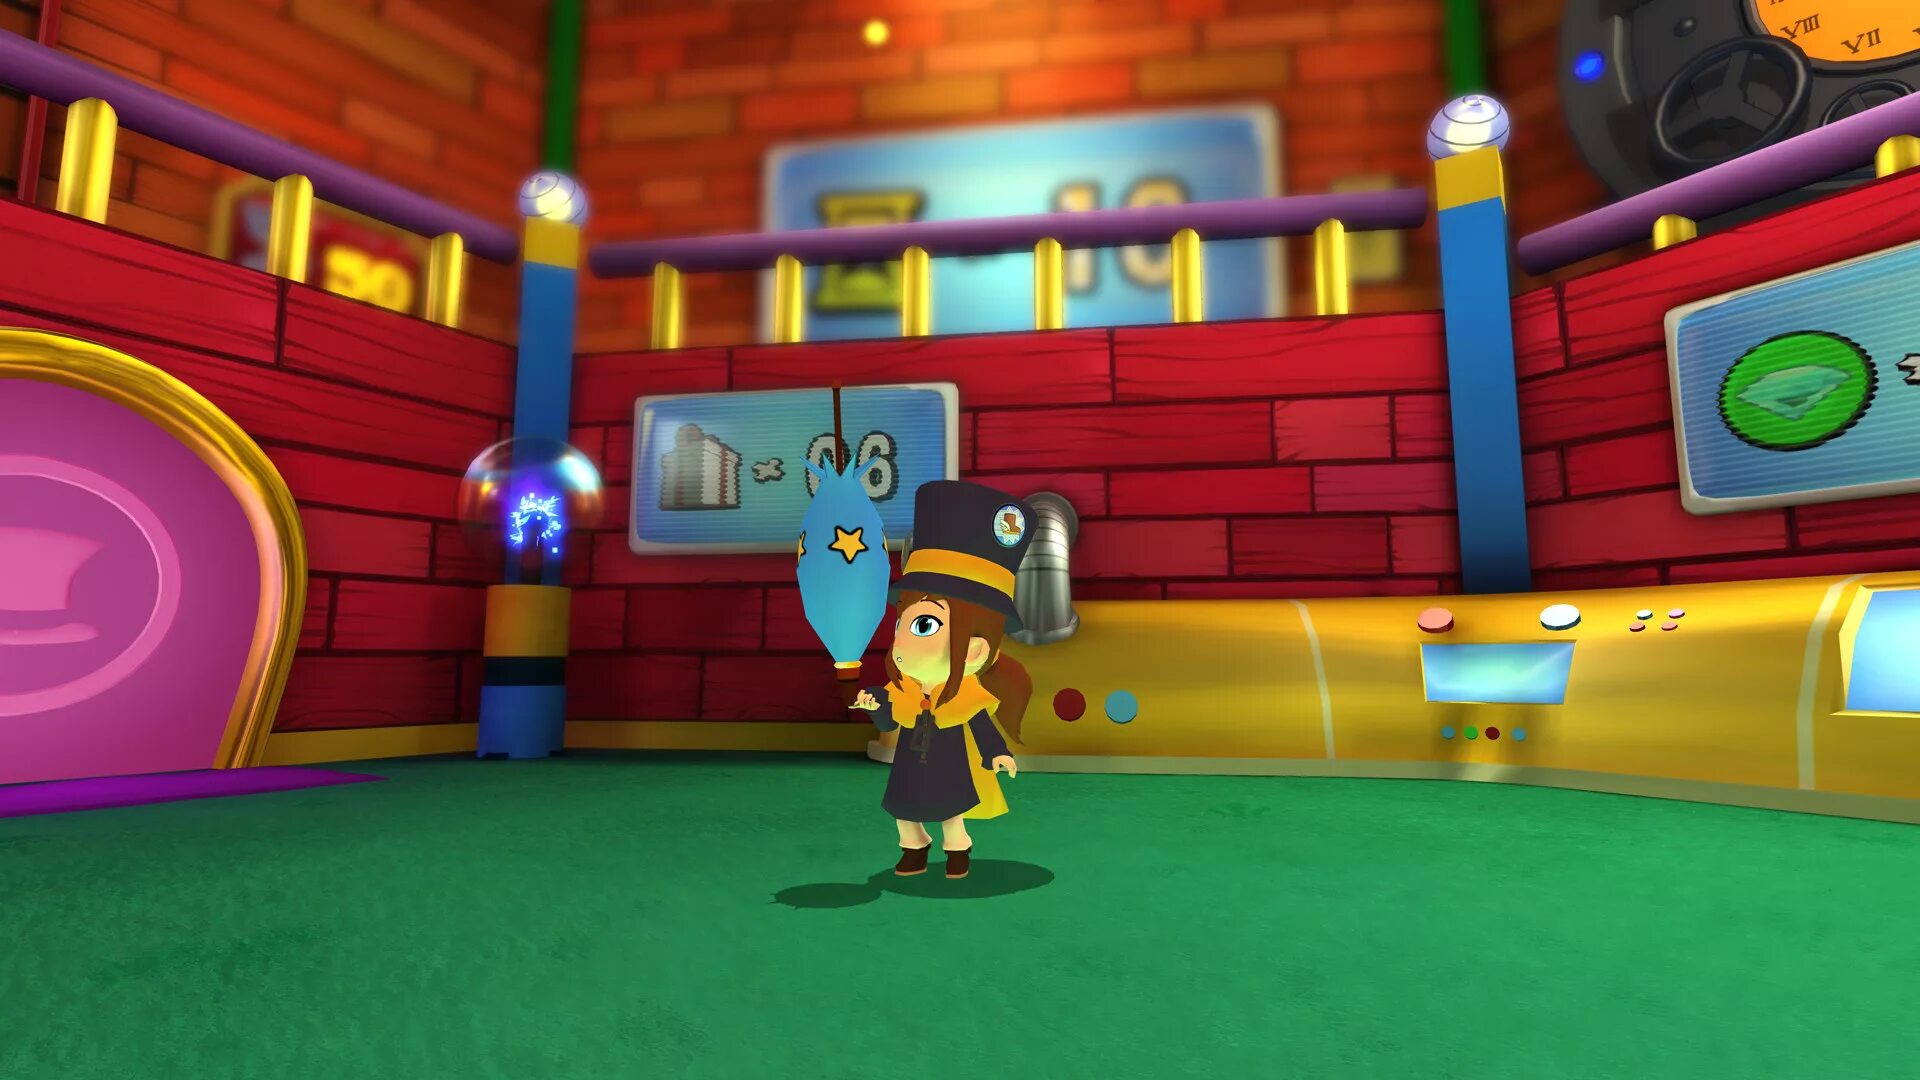 Hatting game. A hat in time игра. A hat in time screenshots. A hat in time Скриншоты. A hat in time геймплей.